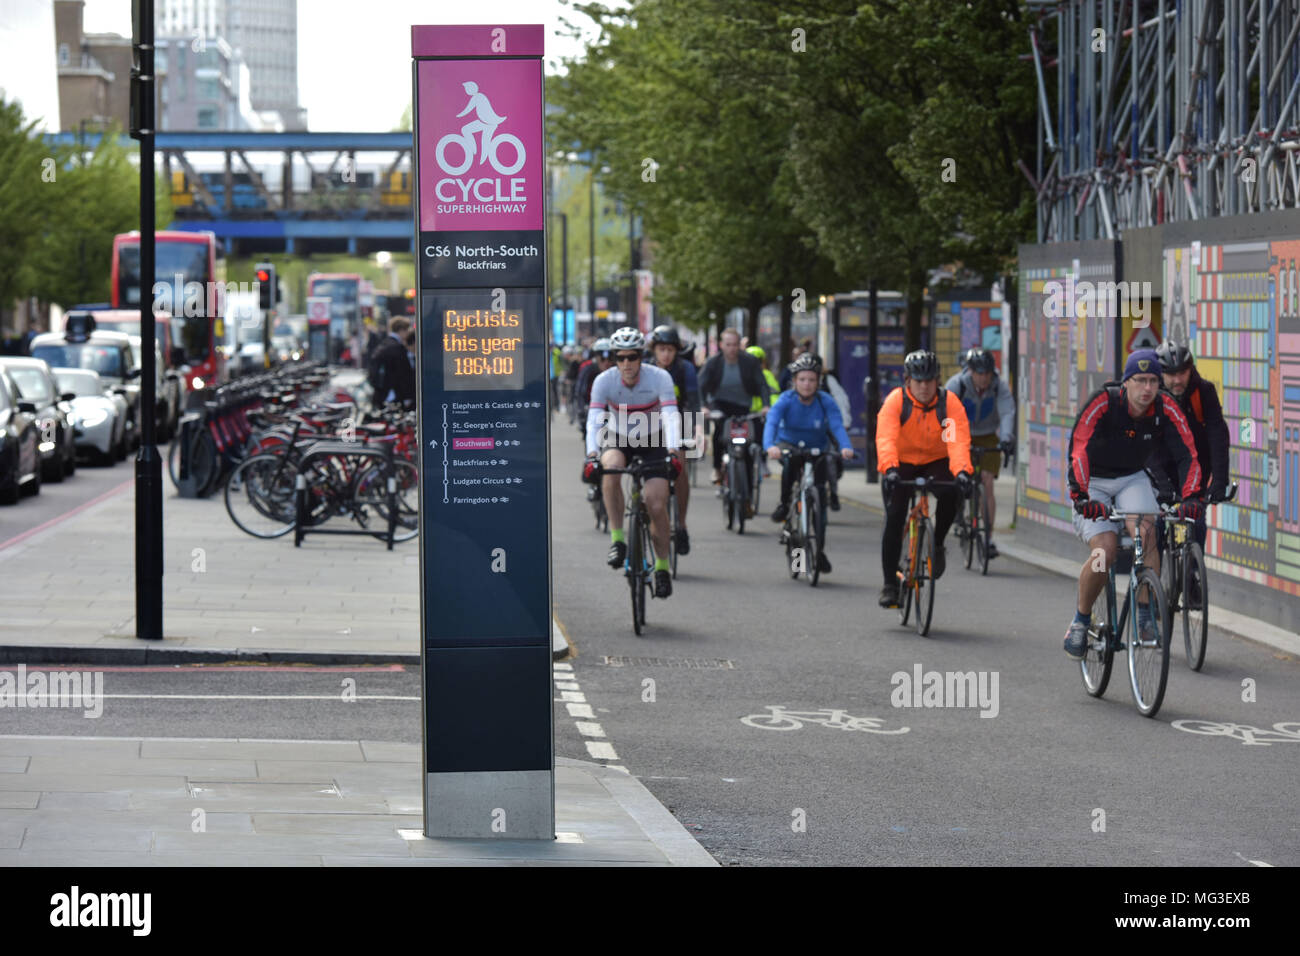 Cyclists ride past the Superhighway bicycle counter as they head south along the CS6 bike lane on Blackfriars Road in central London morning rush hour Stock Photo